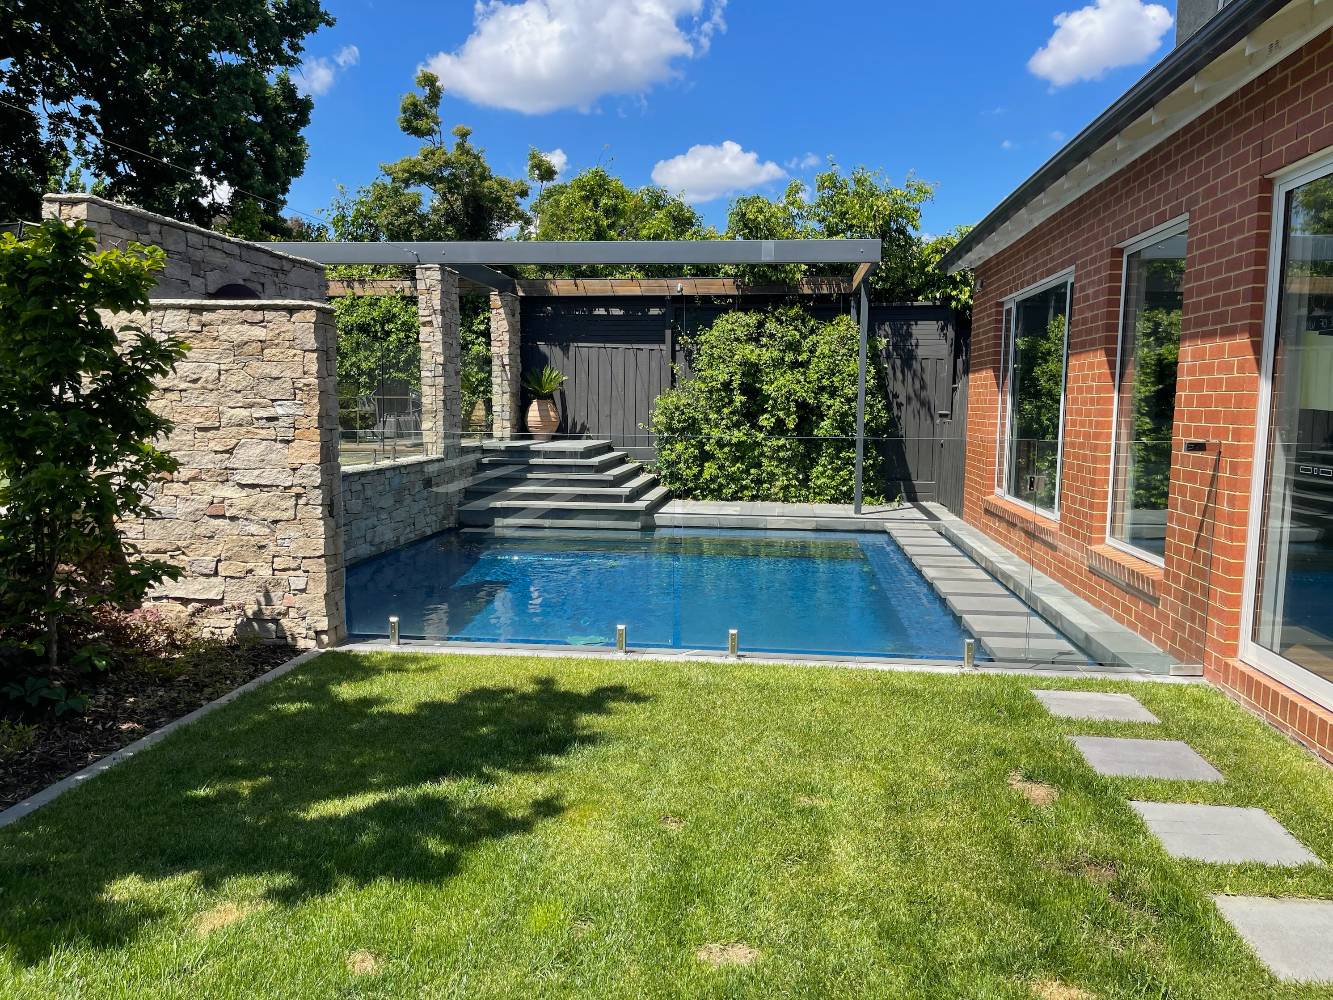 Back lawn and heated pool